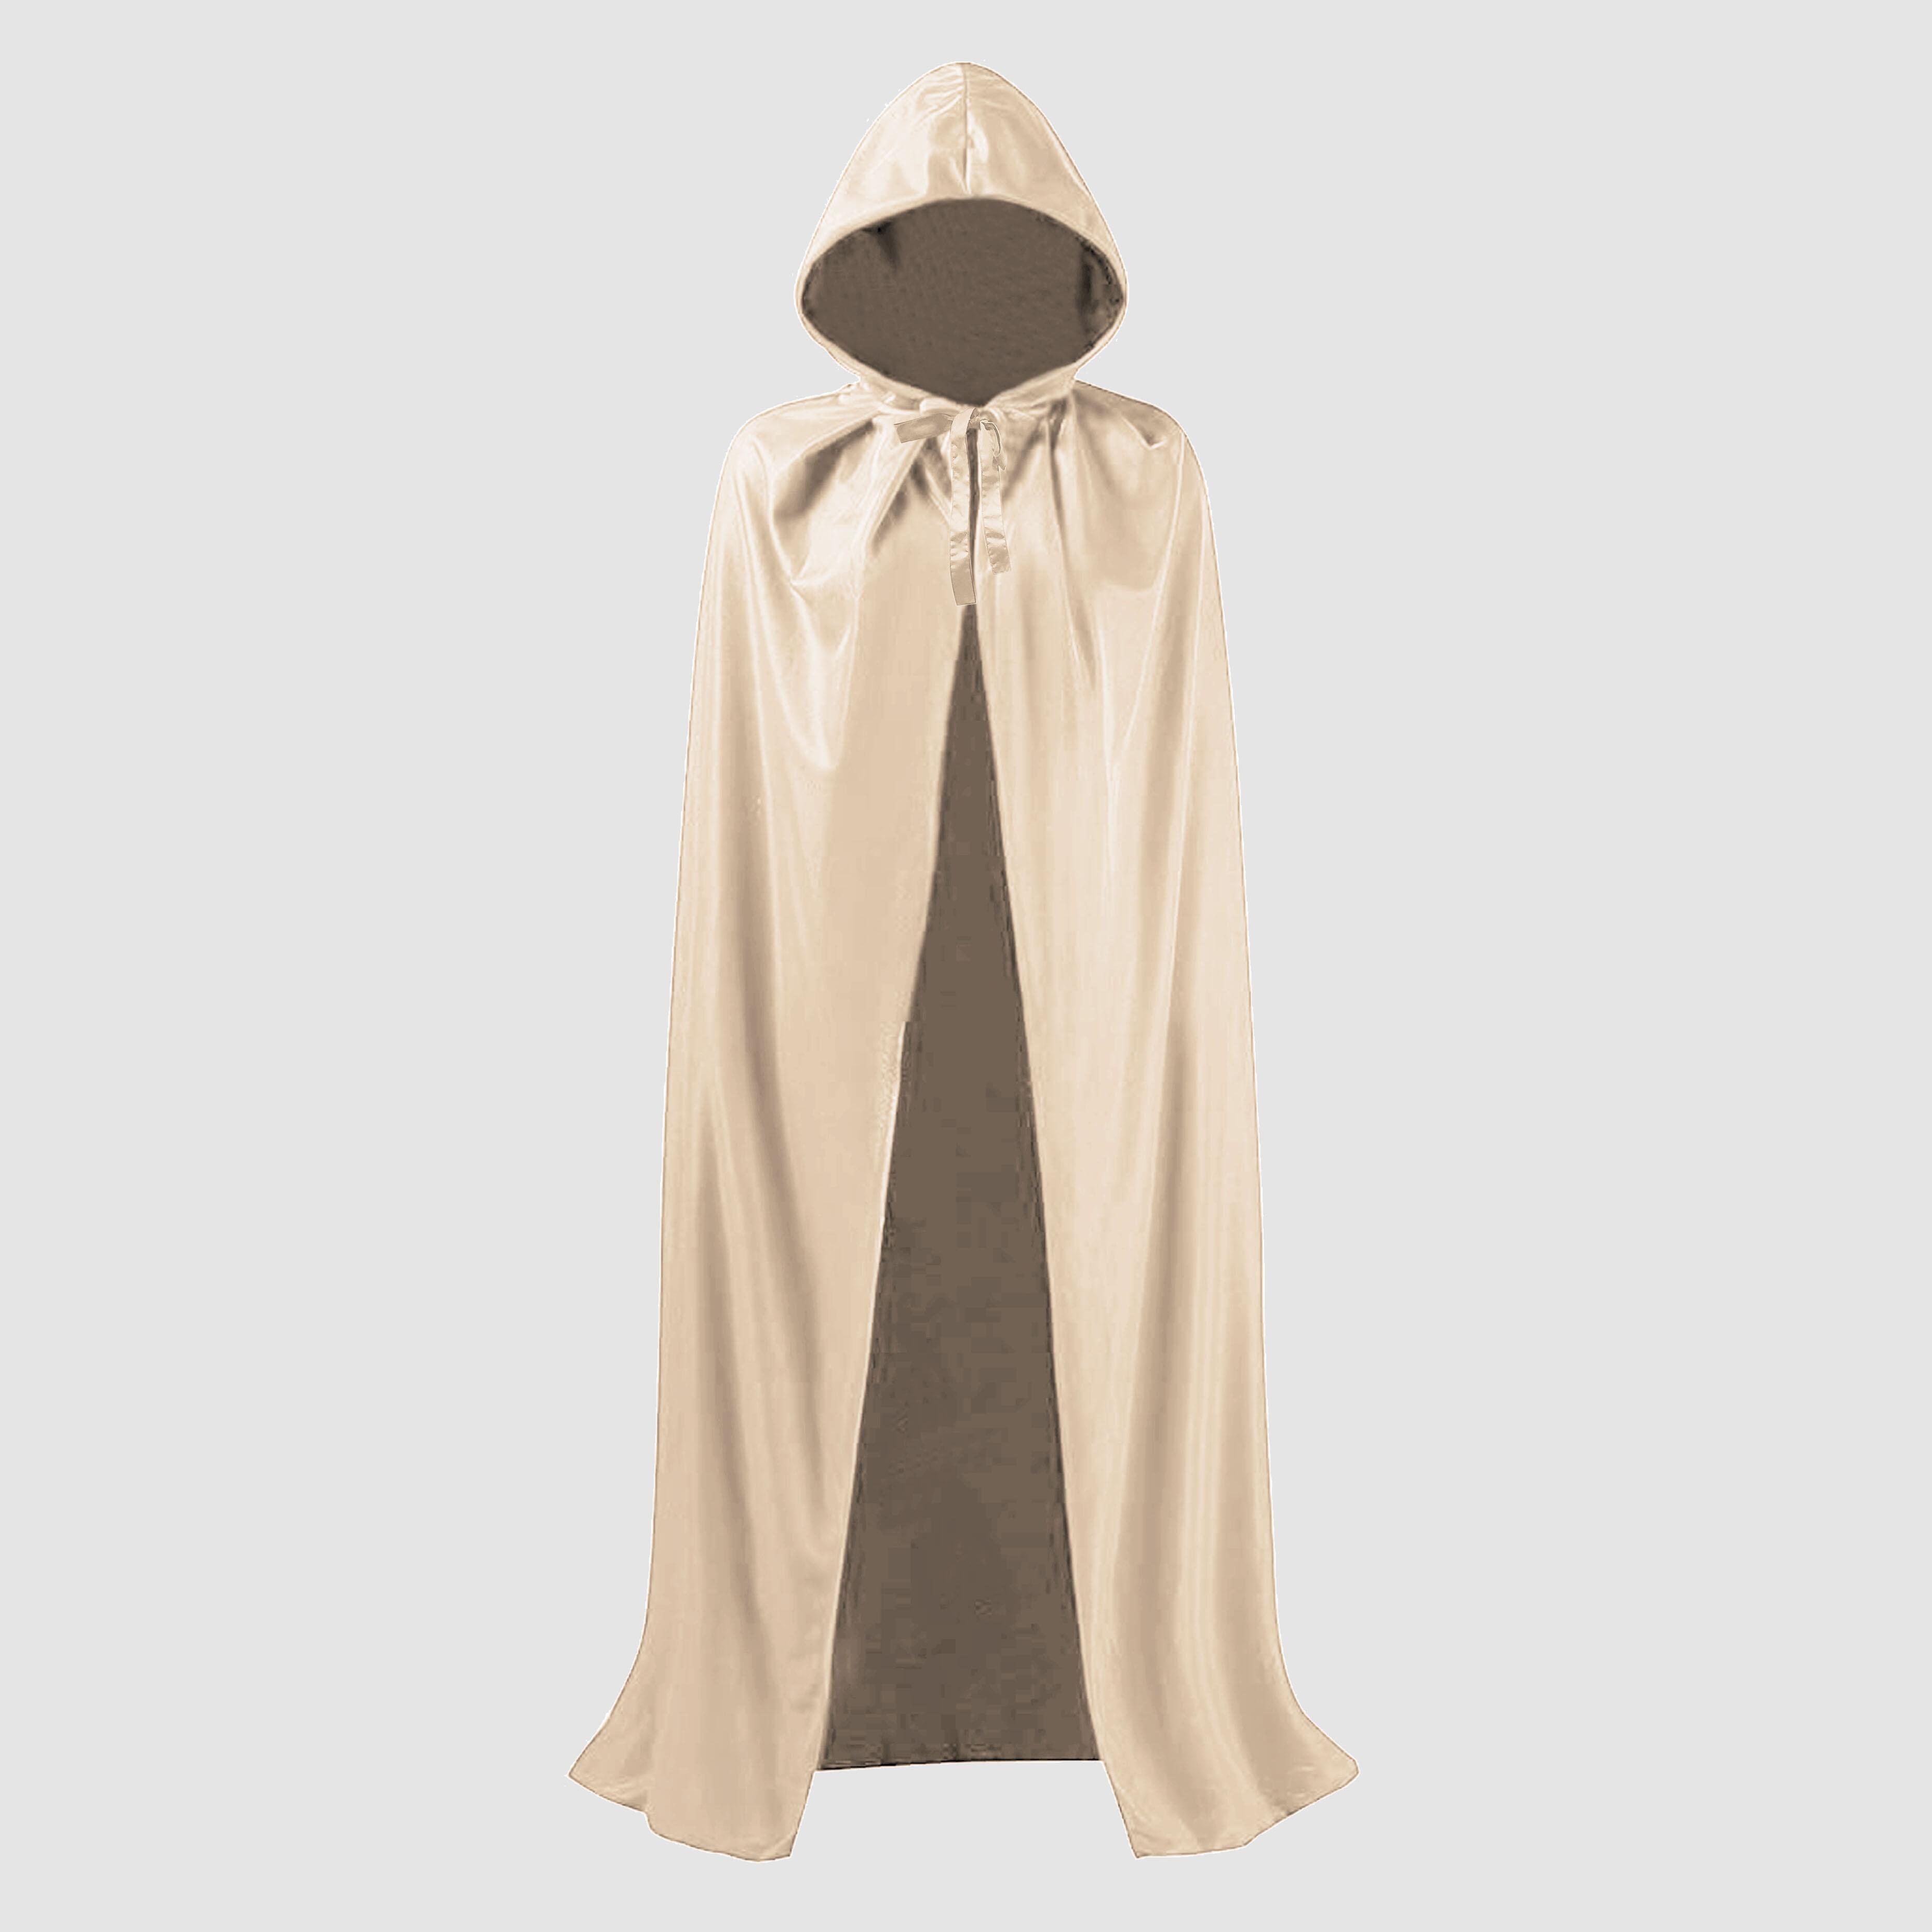 Nibano Hooded Show Gown Cream